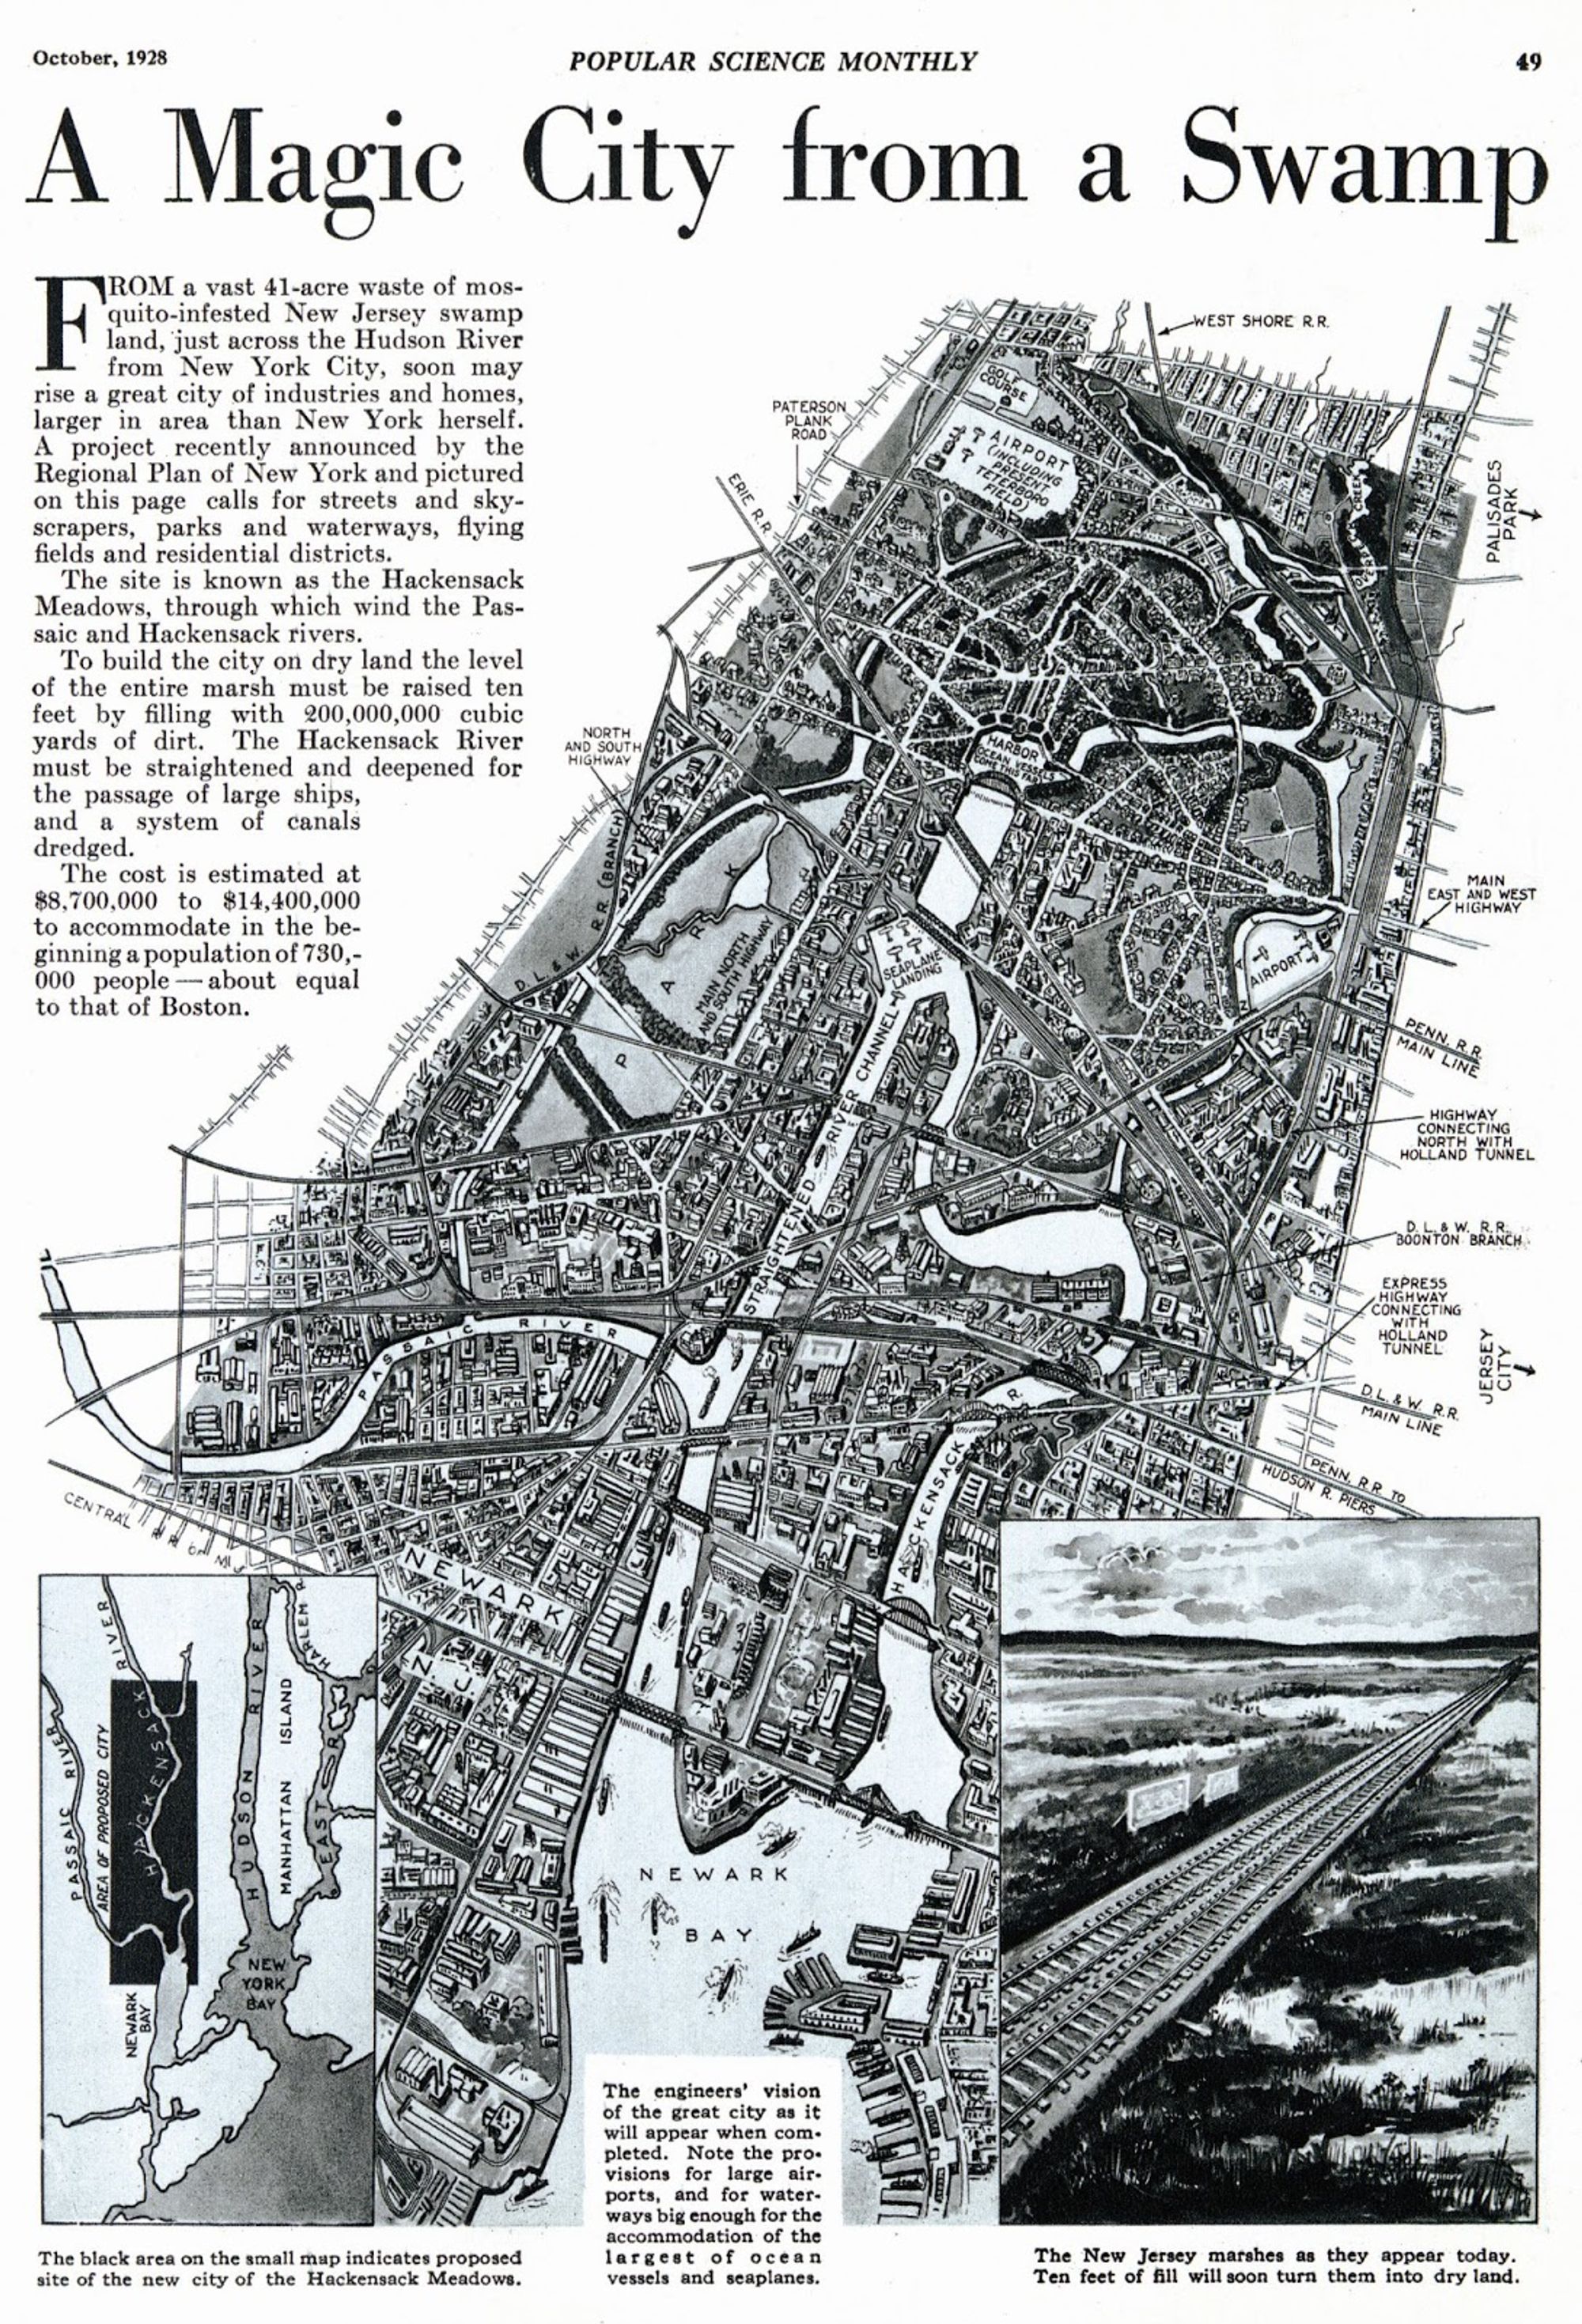 A black and white photo reproduction with an aerial view map of the Meadowlands of a Popular Science Monthly